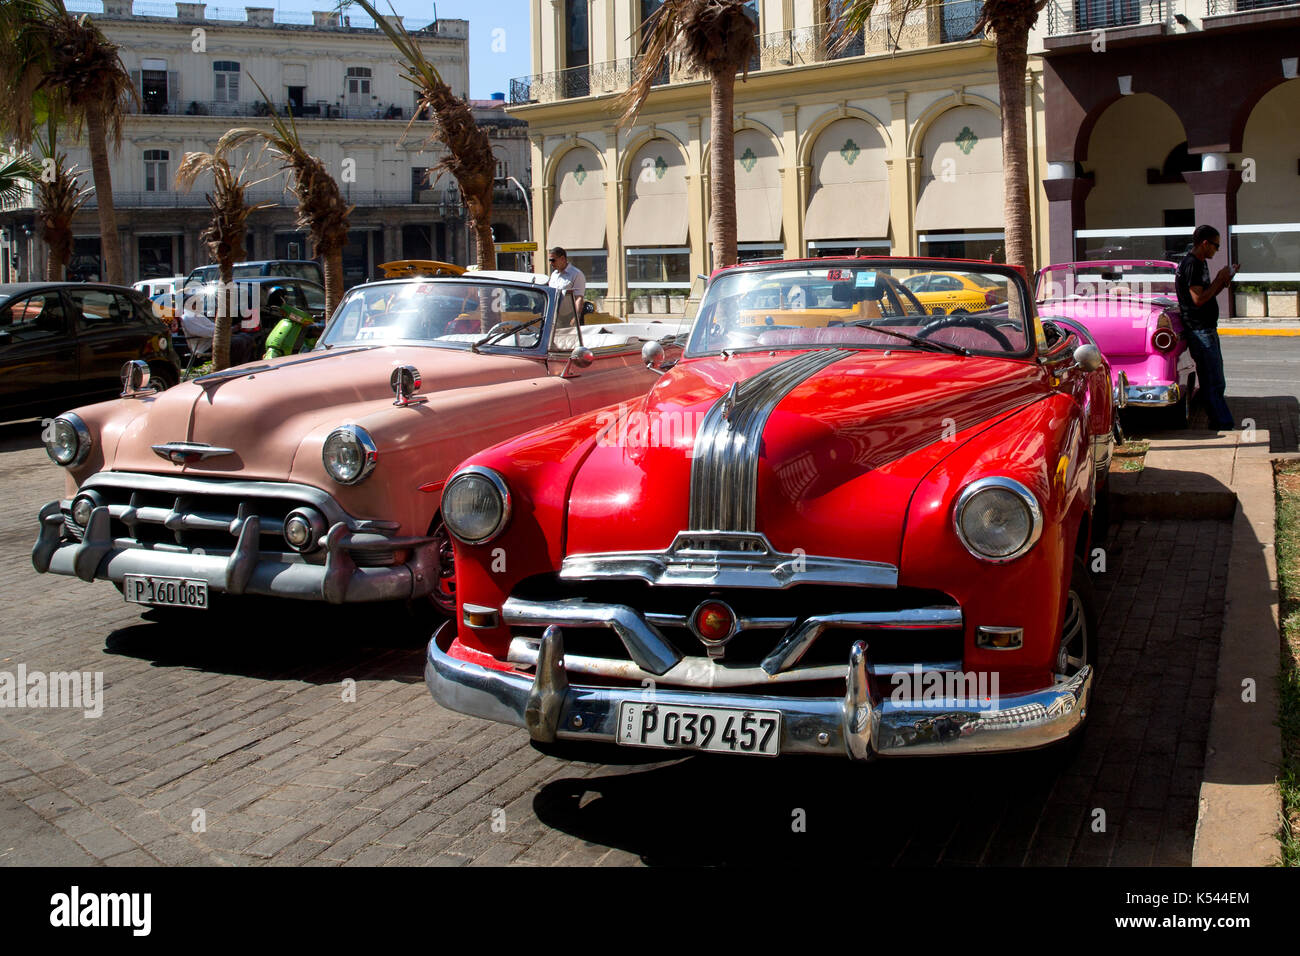 1950's cars parked on a street in the middle of Havana, Cuba in the Caribbean. Stock Photo